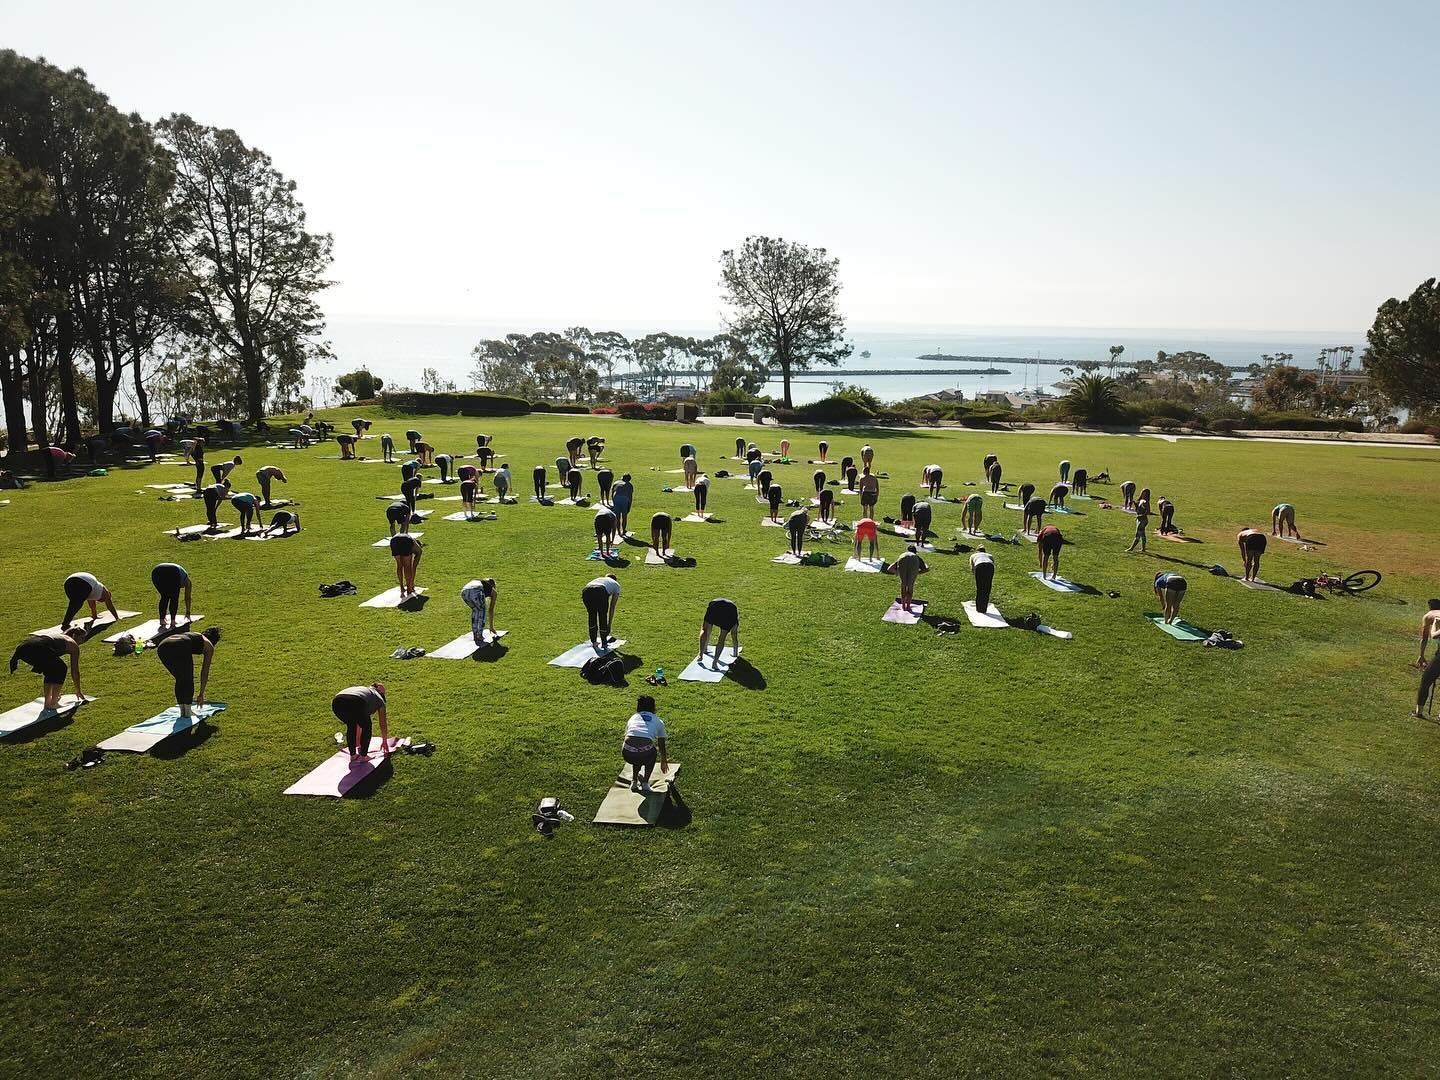 Join us at #iHeartYoga for yoga in the park overlooking the ocean! 🌊 Classes are only $10, and we welcome everyone&mdash;kids, dogs, all ages, and all skill levels! 🧘&zwj;♀️ Breathe in the fresh air and enjoy the beauty of nature while you #yoga. C